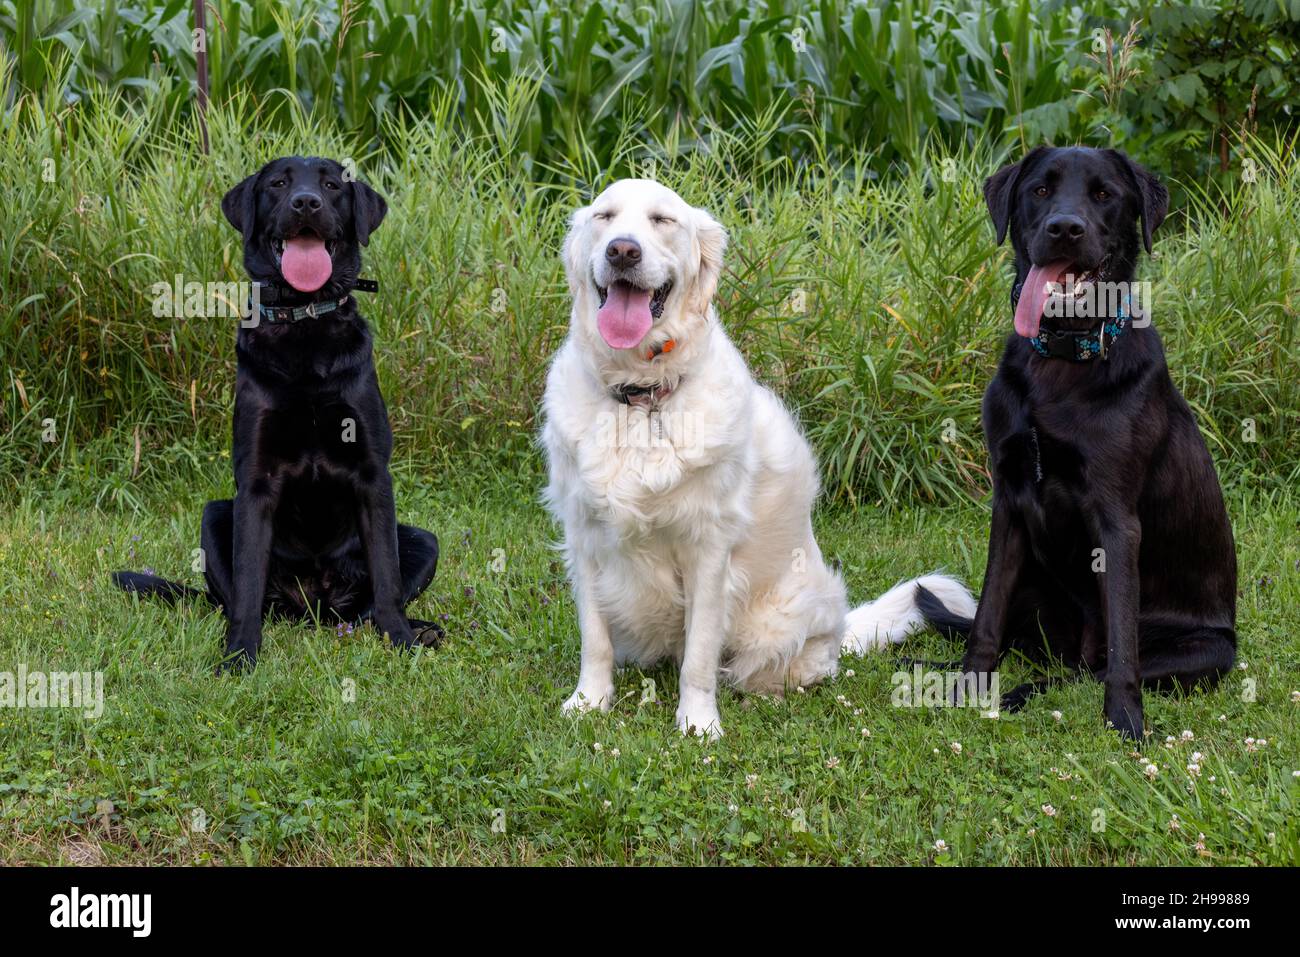 2 Black Labs and a English Cream Golden Retriever making funny faces Stock Photo